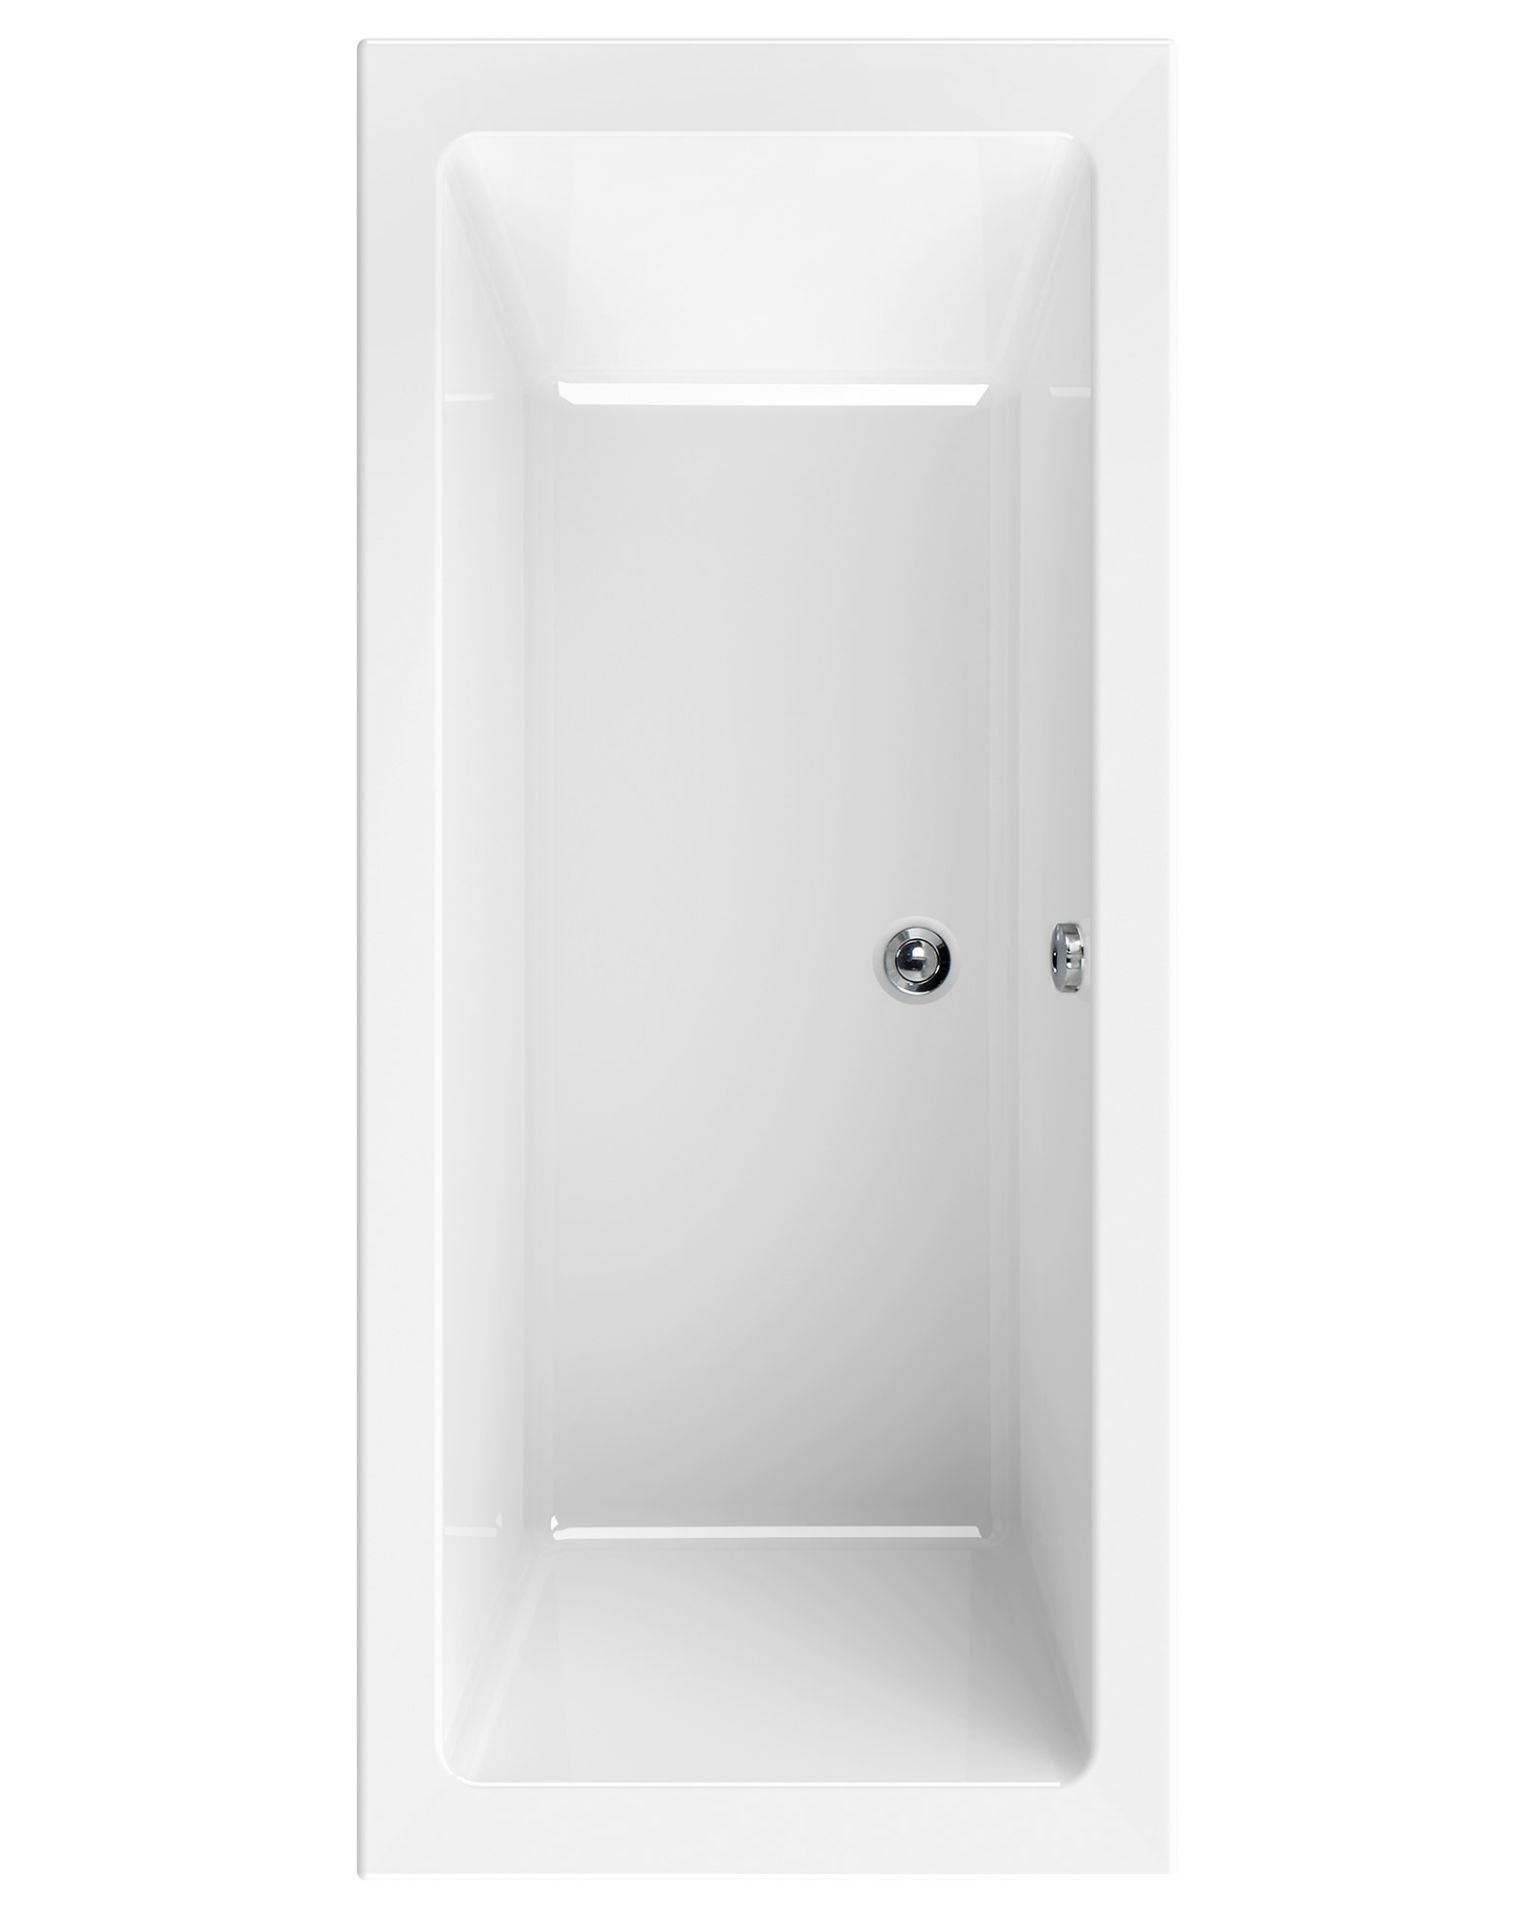 (UR5) 2000x900mm Keramag Deep Double Ended Bath. RRP £997.99. Our range of double ended baths... - Image 2 of 4